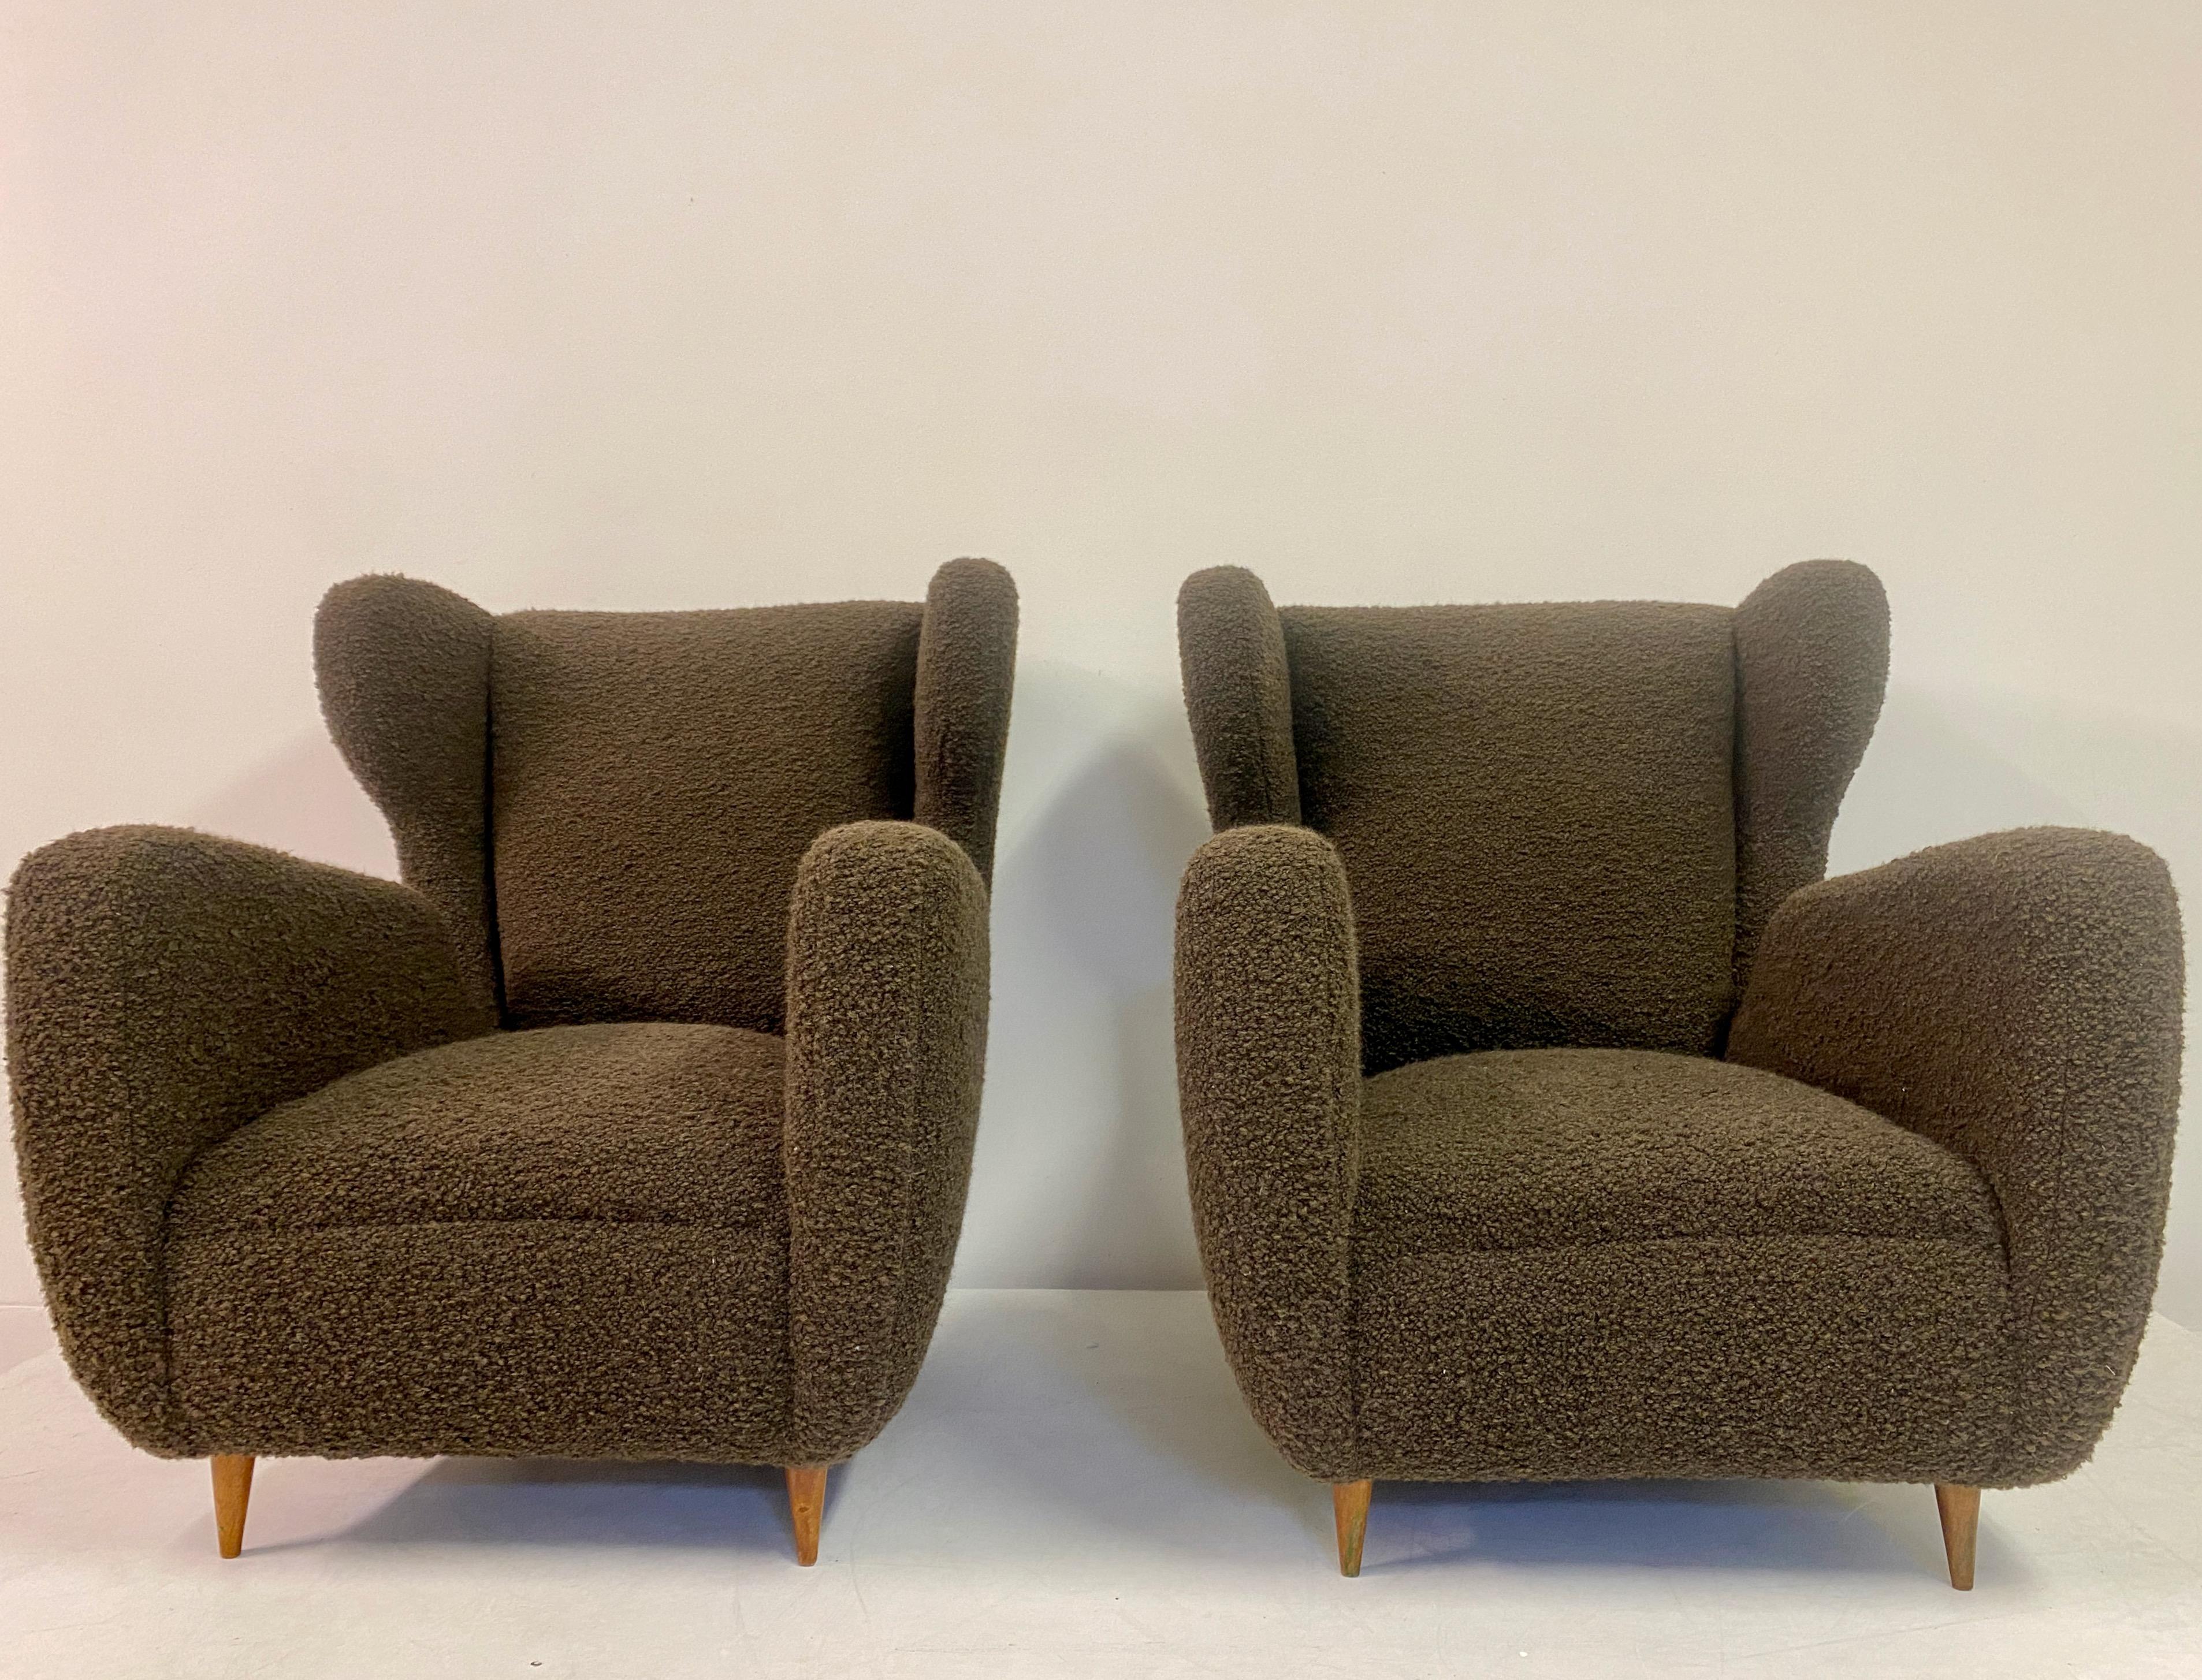 Pair of armchairs

Large size

New Designers Guild chocolate boucle

Turned wooden legs

Well made frame

Seat height 42cm

Italy 1950s.